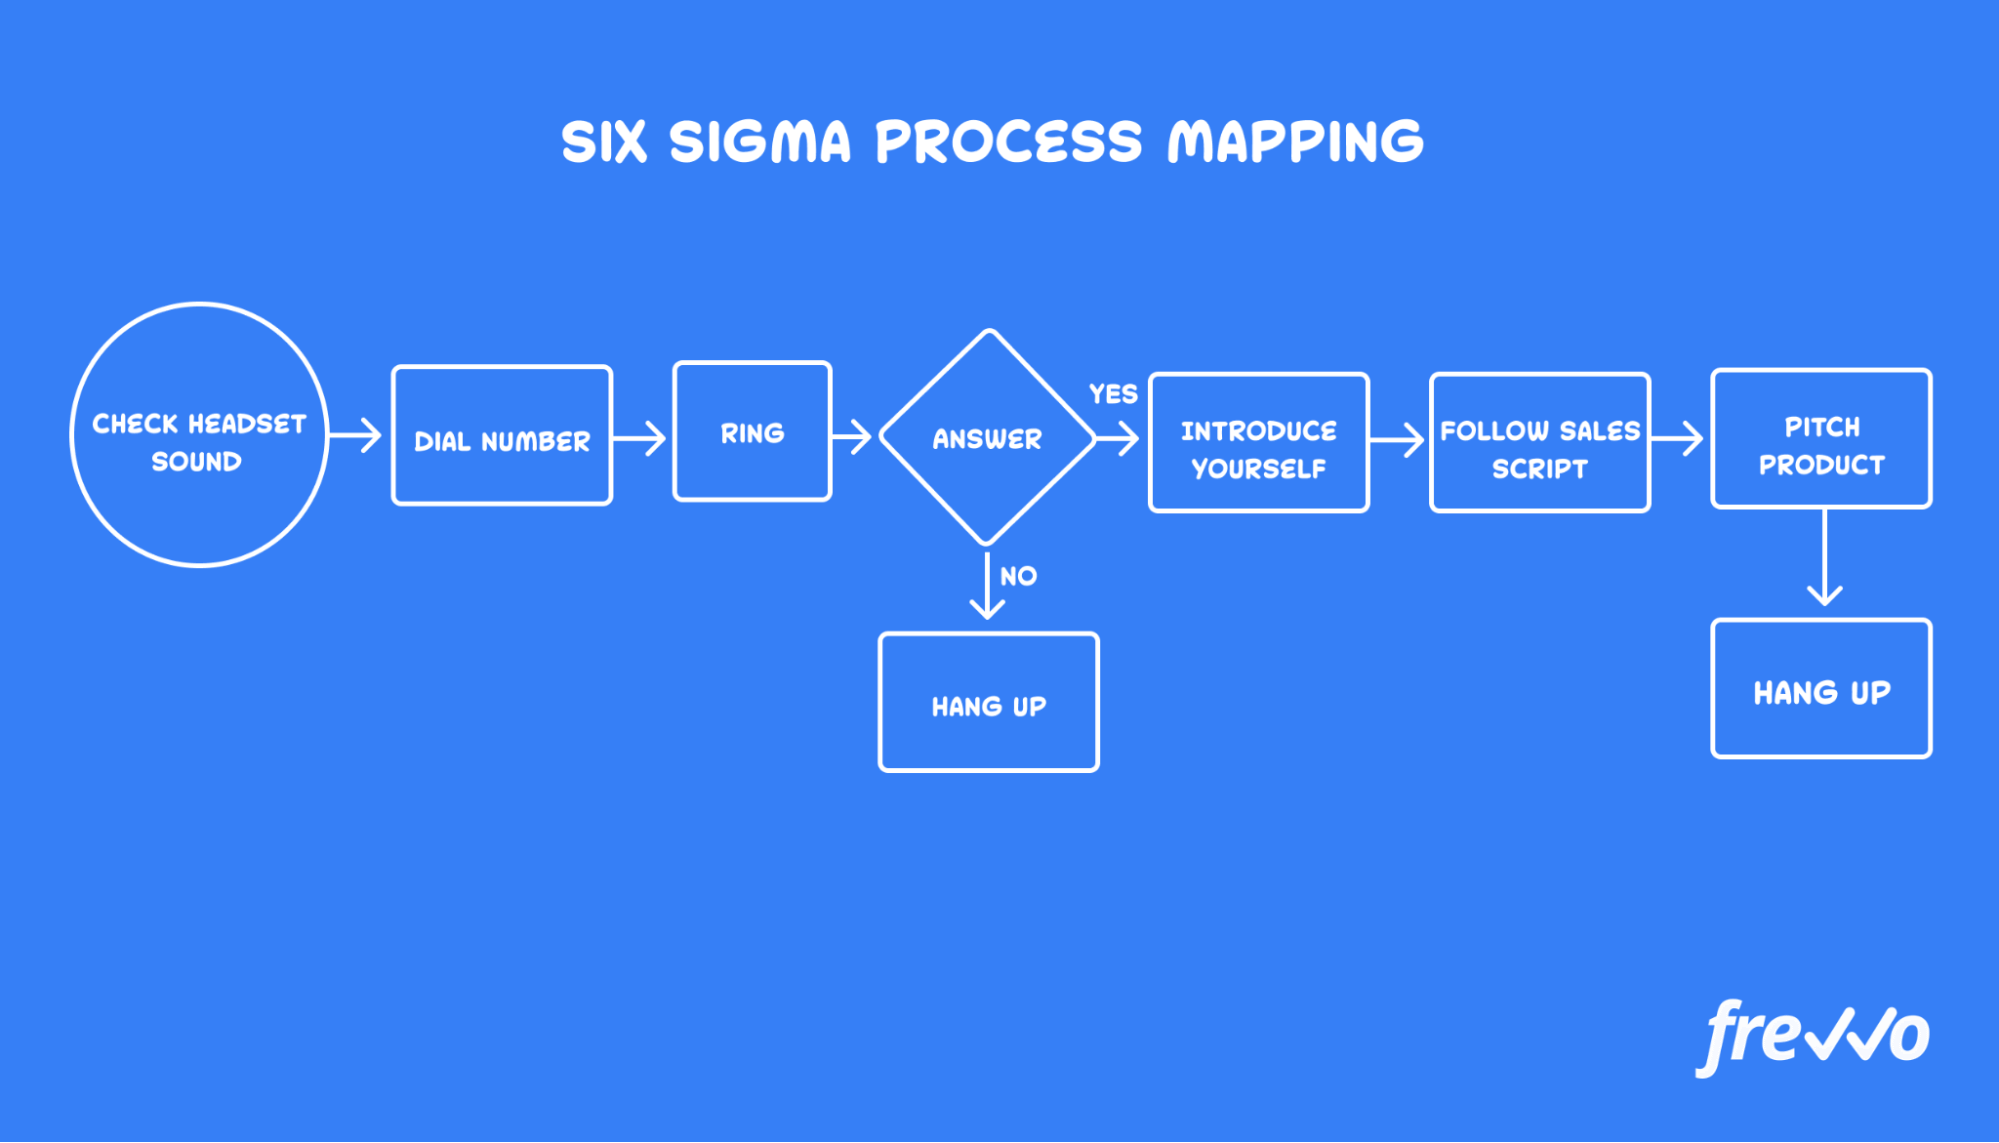 Process mapping example from Six Sigma